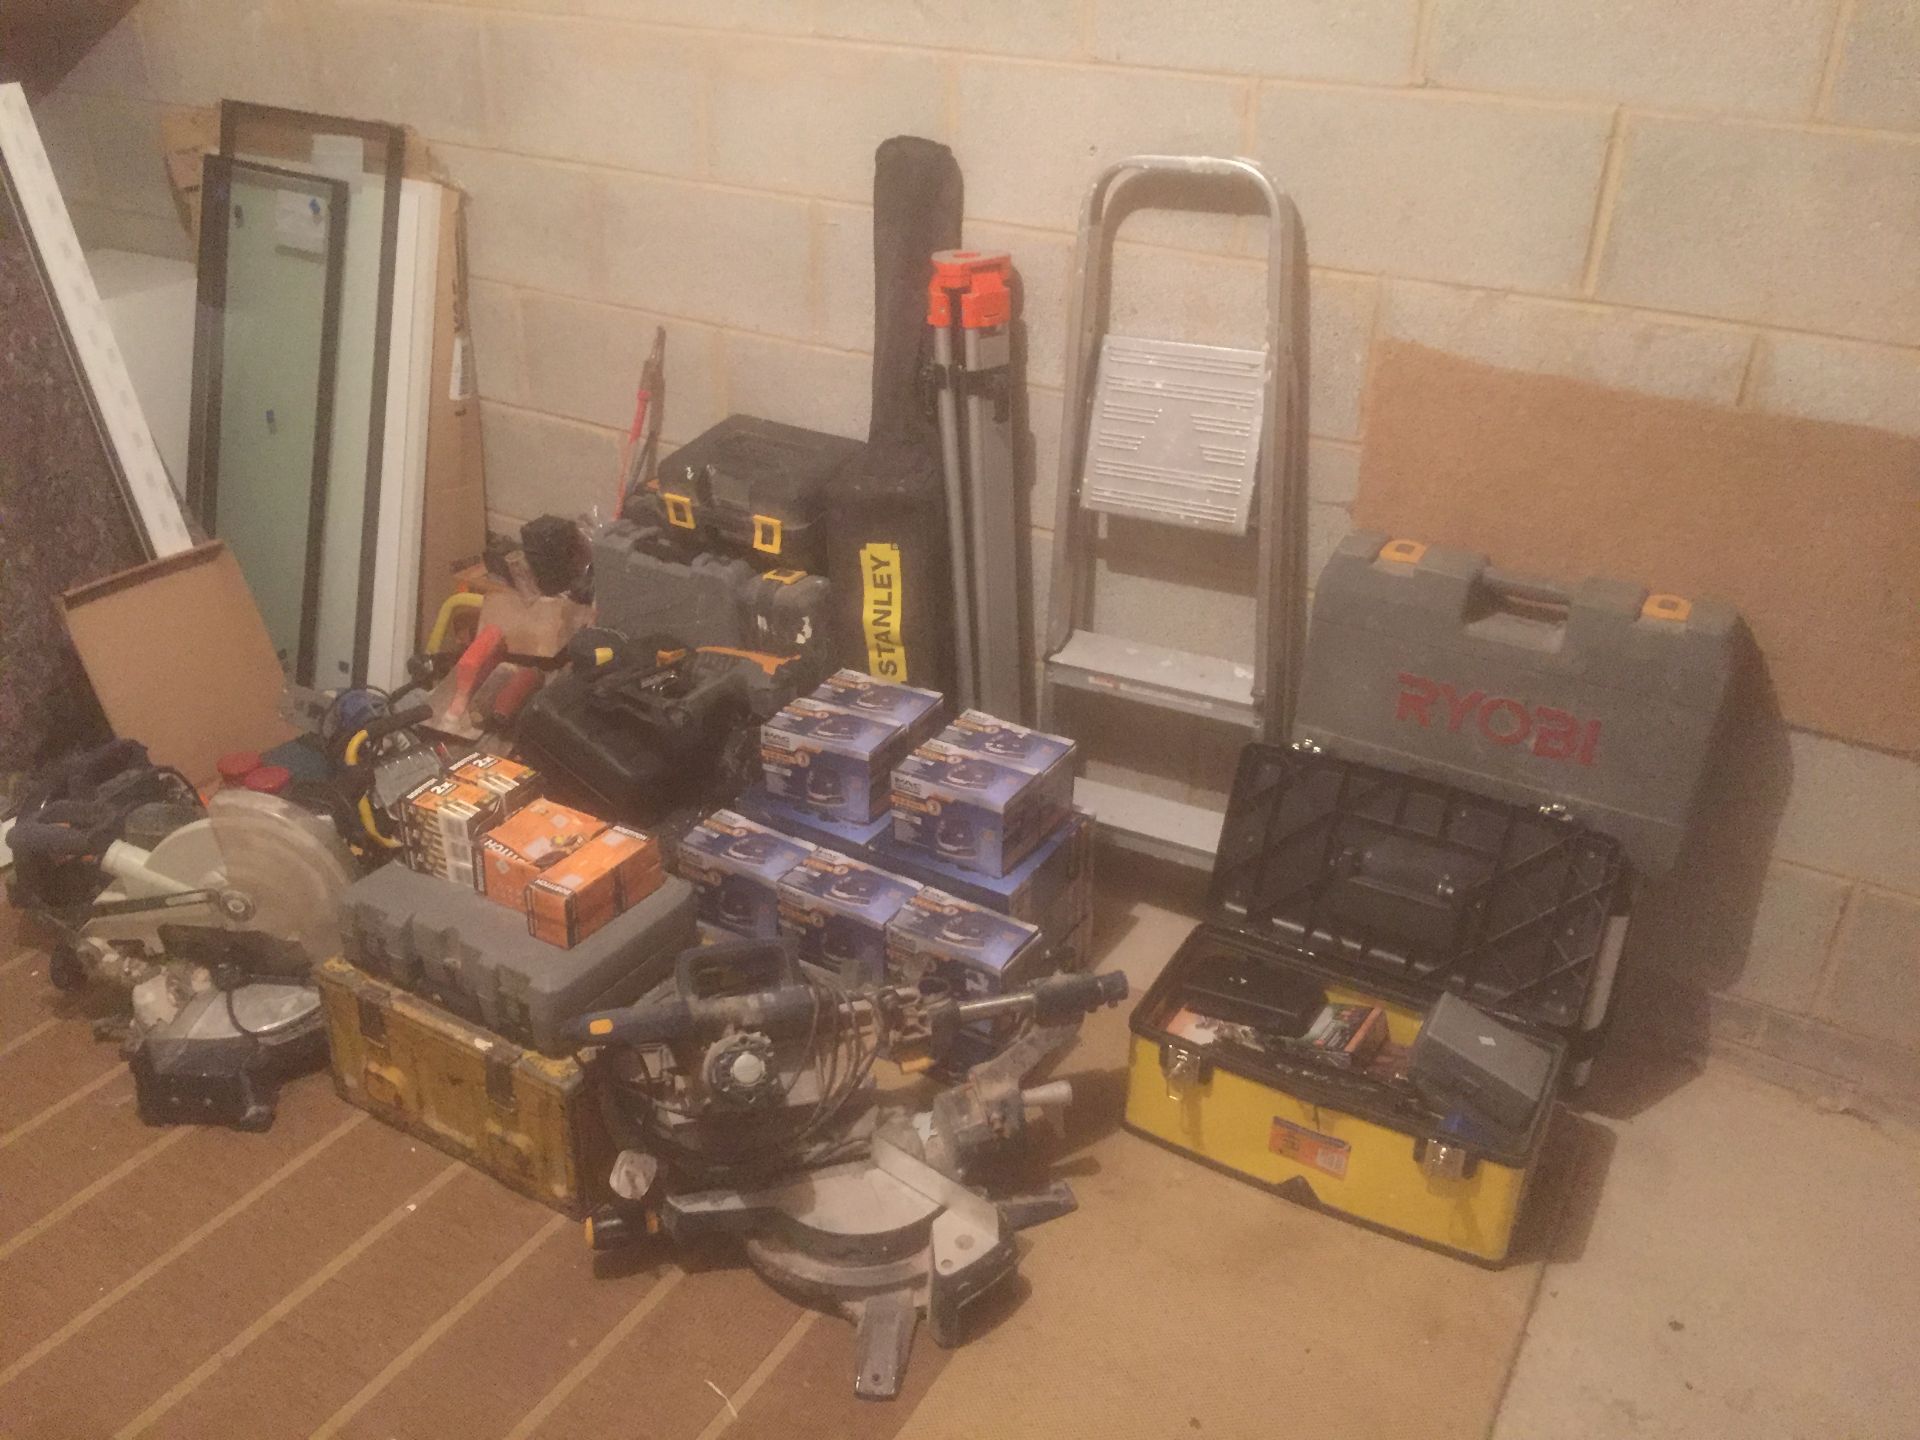 HUGE JOB LOT OF VARIOUS POWER TOOLS, HAND TOOLS, ACCESSORIES, NO RESERVE - Image 8 of 8